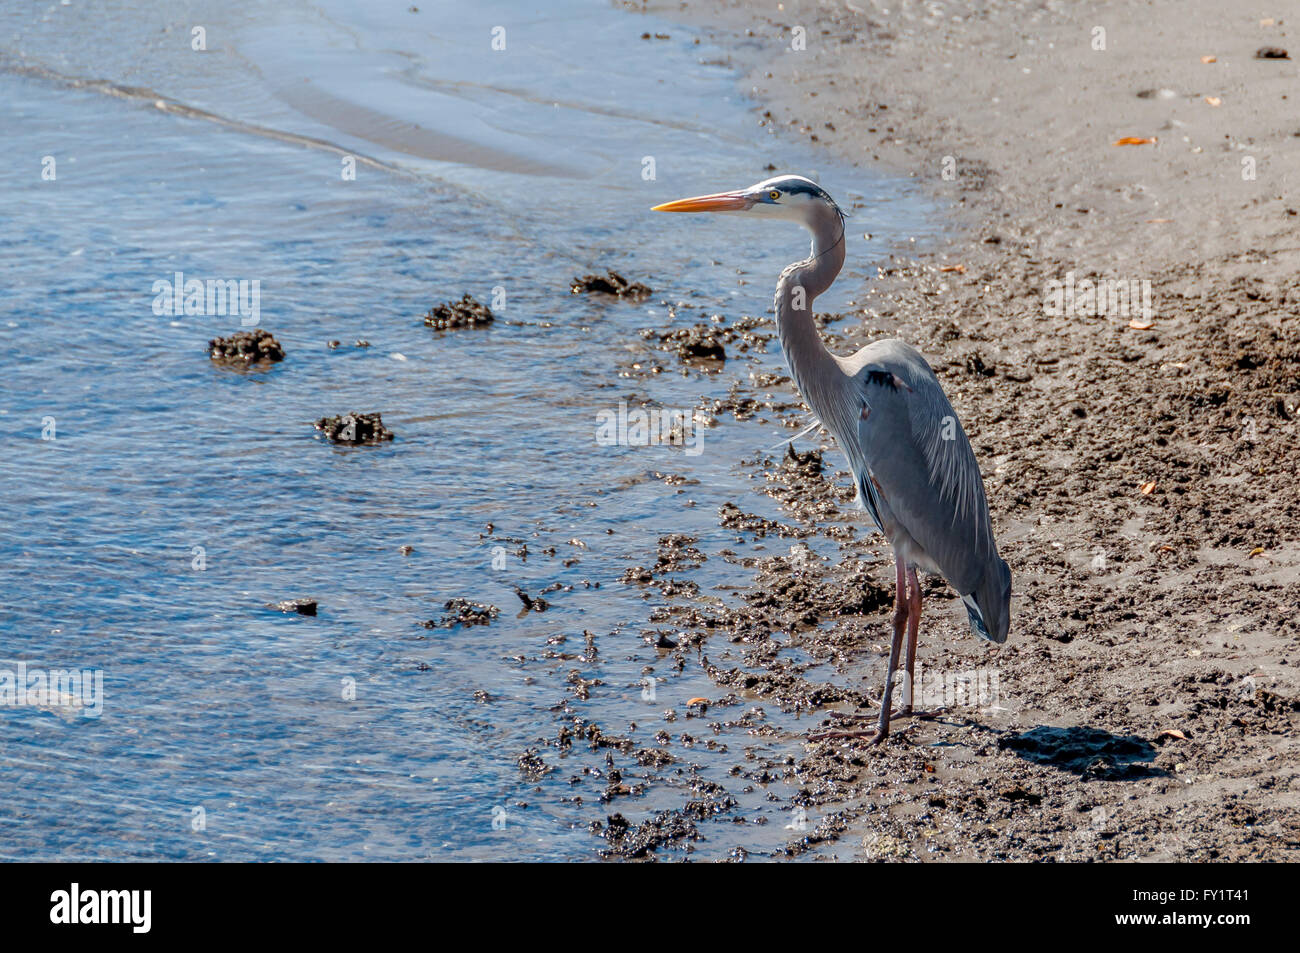 Great blue heron bird stands on sand beach at water's edge, Sea of Cortez and La Paz Bay, Baja, Mexico, horizontal / landscape. Stock Photo